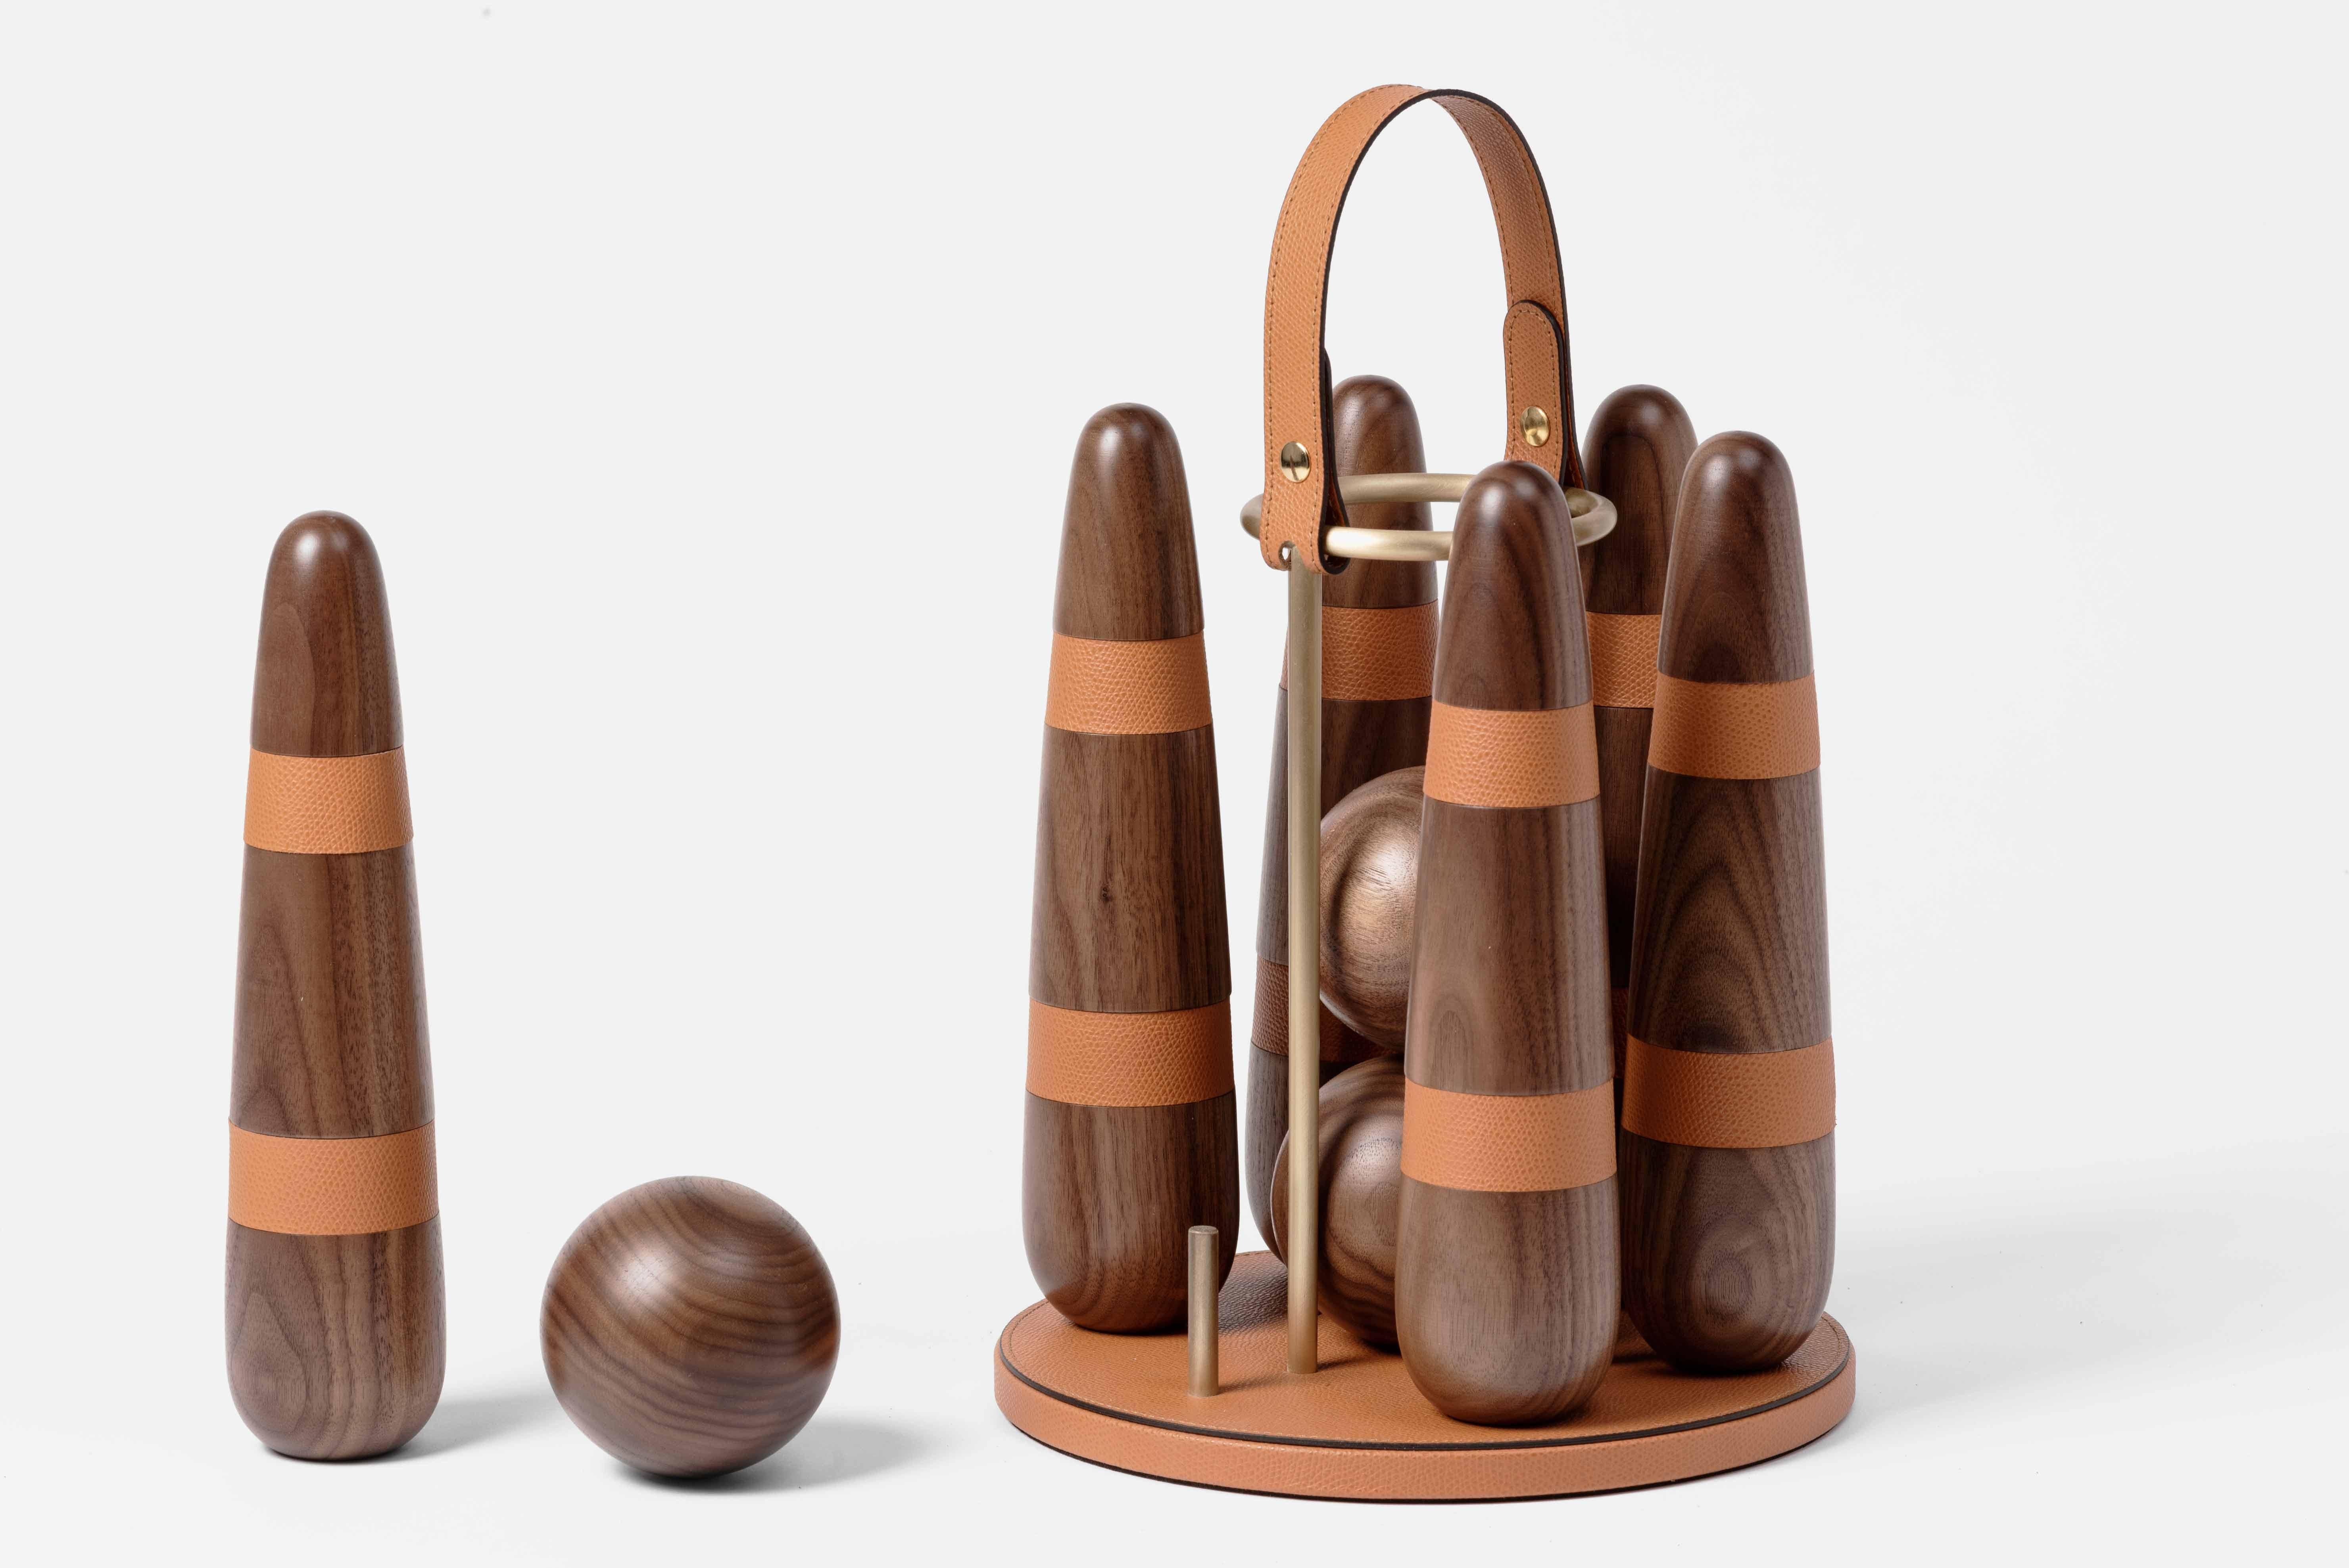 More than a game.

Masterfully handcrafted with precious canaletto walnut wood Pinetti portable Bowling set is enriched with leather details and satin brass finish. A sophisticated gift for any age or an ultimate statement piece for your home or